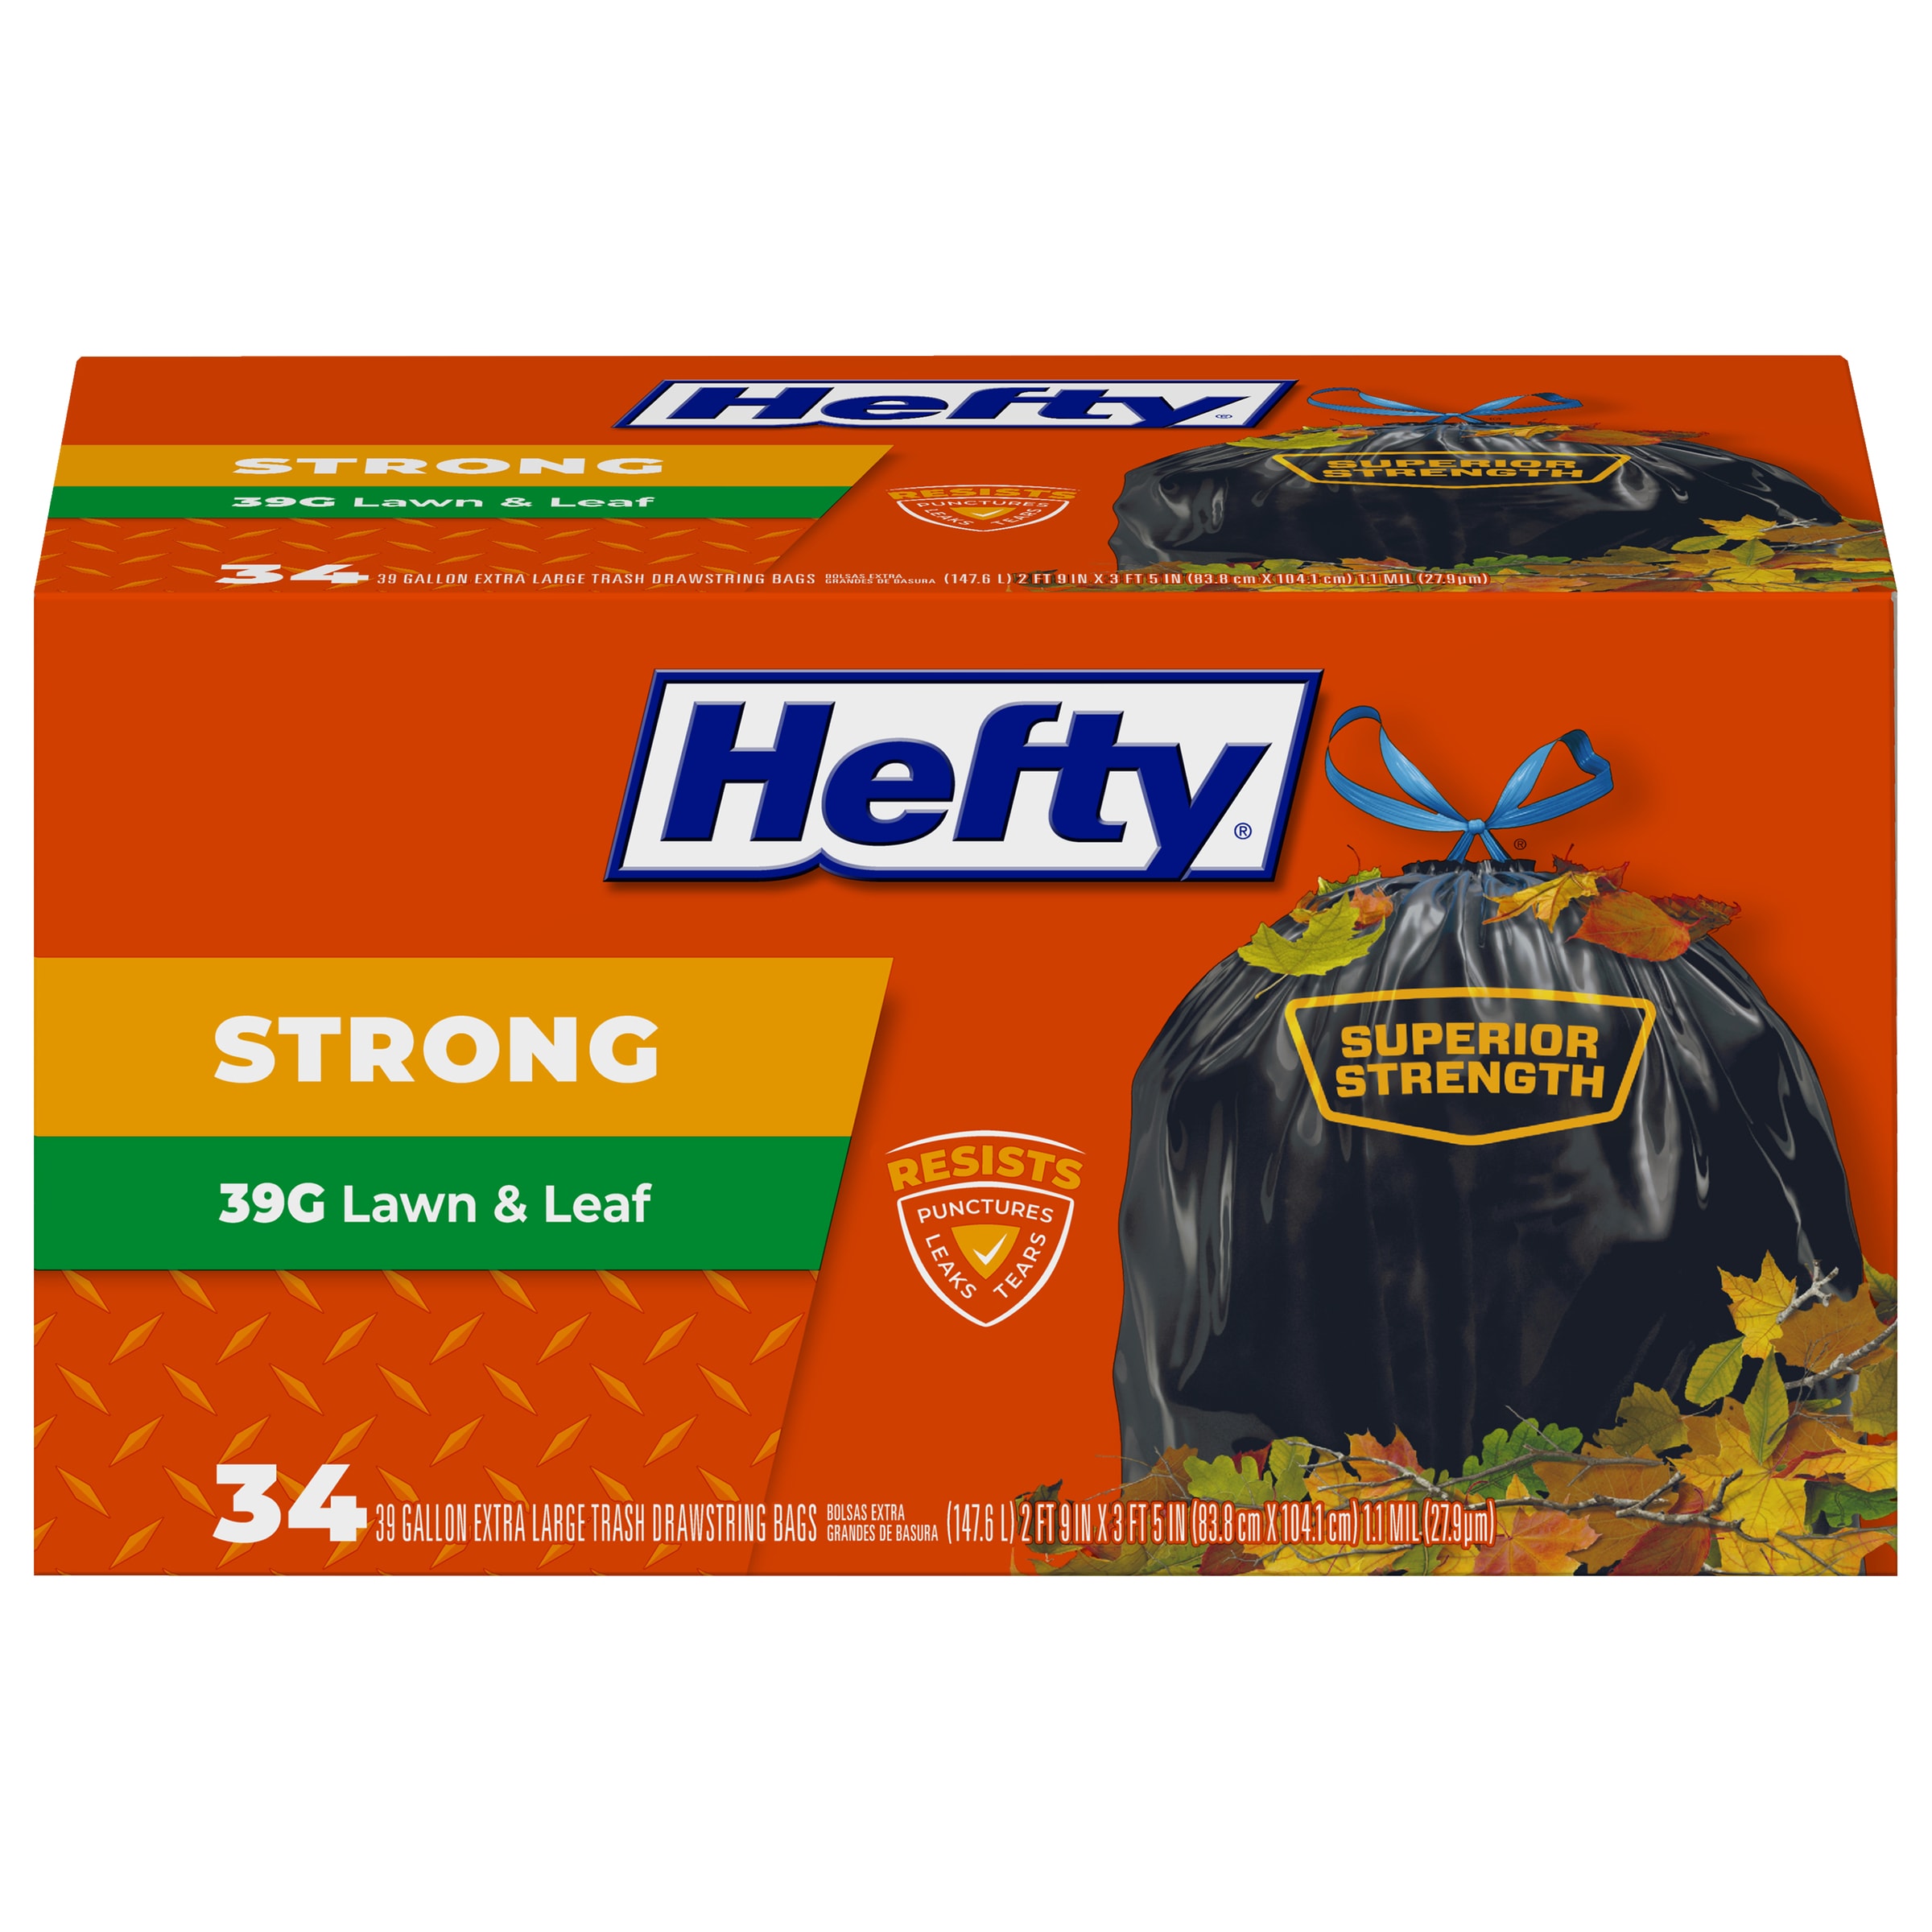 Hefty Strong Drawstring Bags, Lawn & Leaf, Extra Large, 39 Gallon, Mega Pack - 38 bags